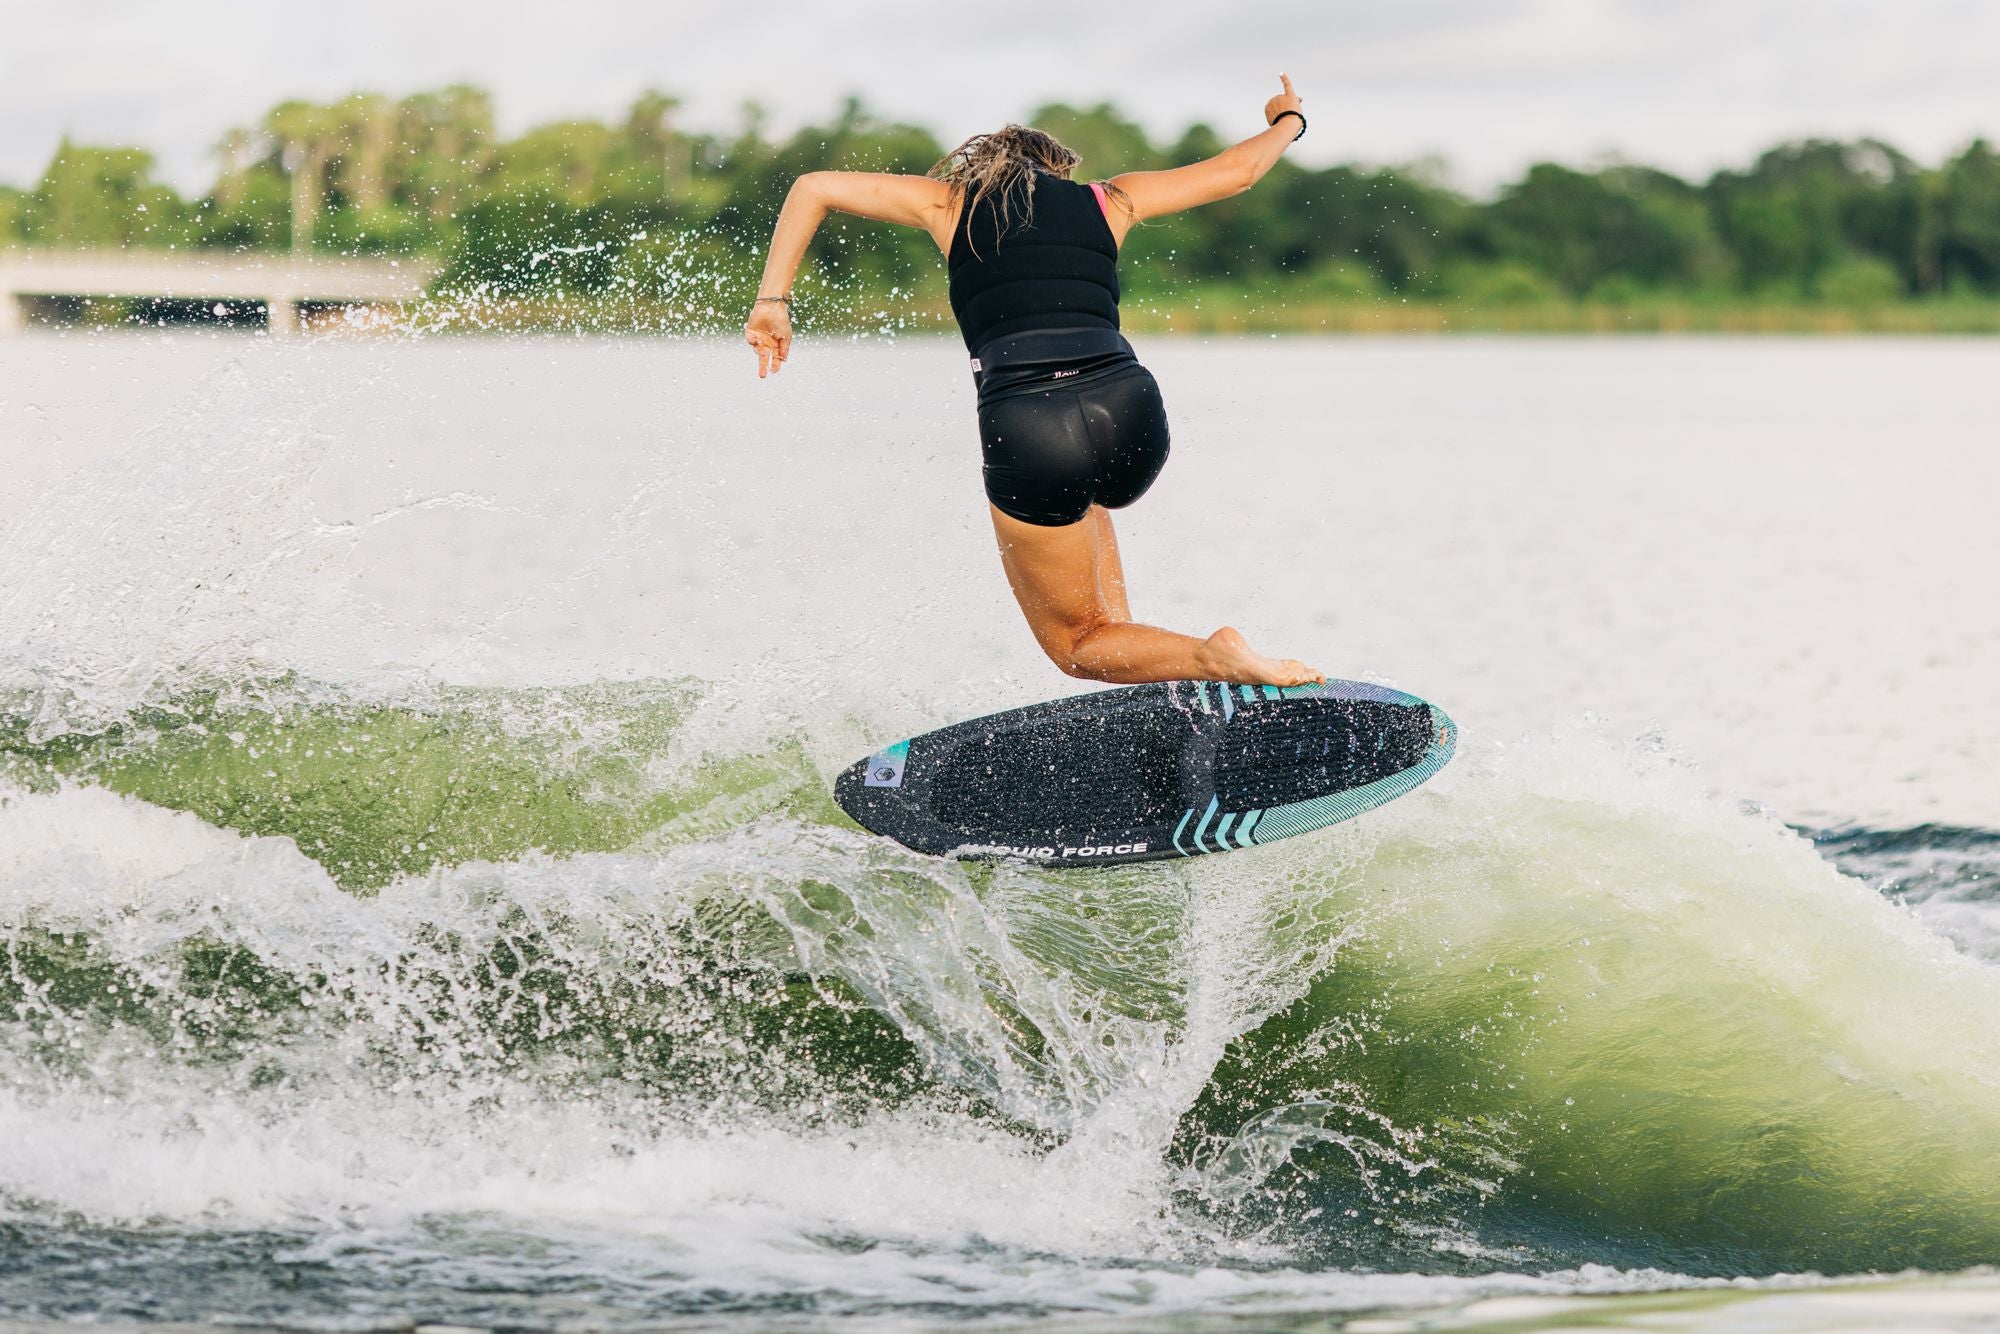 A lightweight woman is effortlessly gliding on a Liquid Force 2023 Neo Wakesurf Board, gracefully riding a wave like a skilled skim surfer.